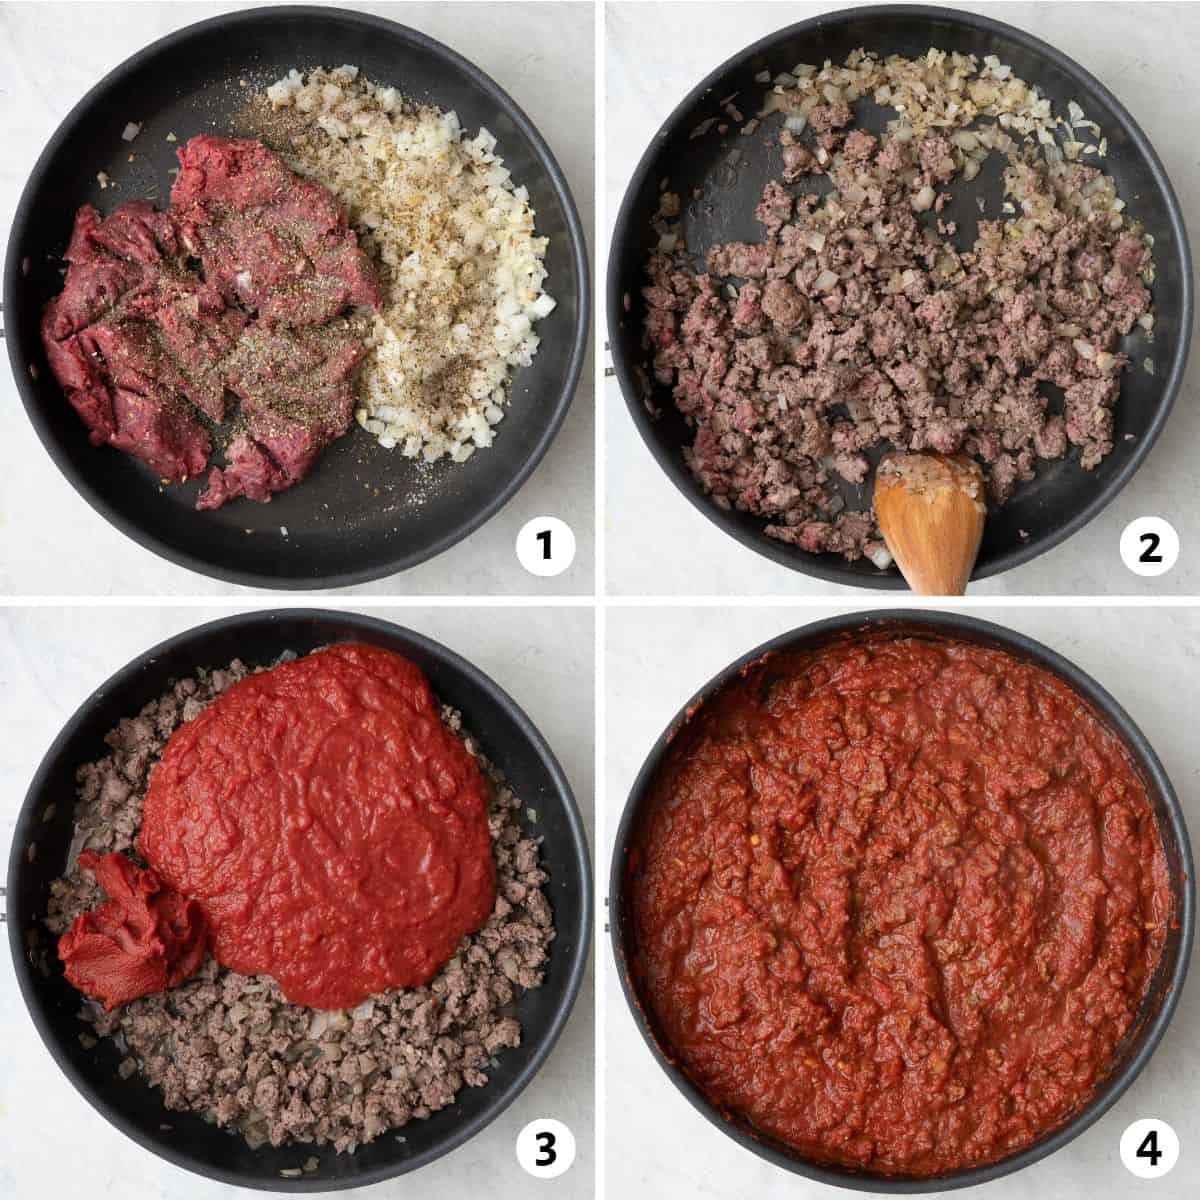 4 image collage making recipe: 1- Ground beef, onions and garlic in a large skillet, with Italian seasoning, 2- Spatula breaking partially cooked ground beef into smaller pieces, 3- crushed tomatoes and tomato paste added, 4- After simmering to show thickened sauce.